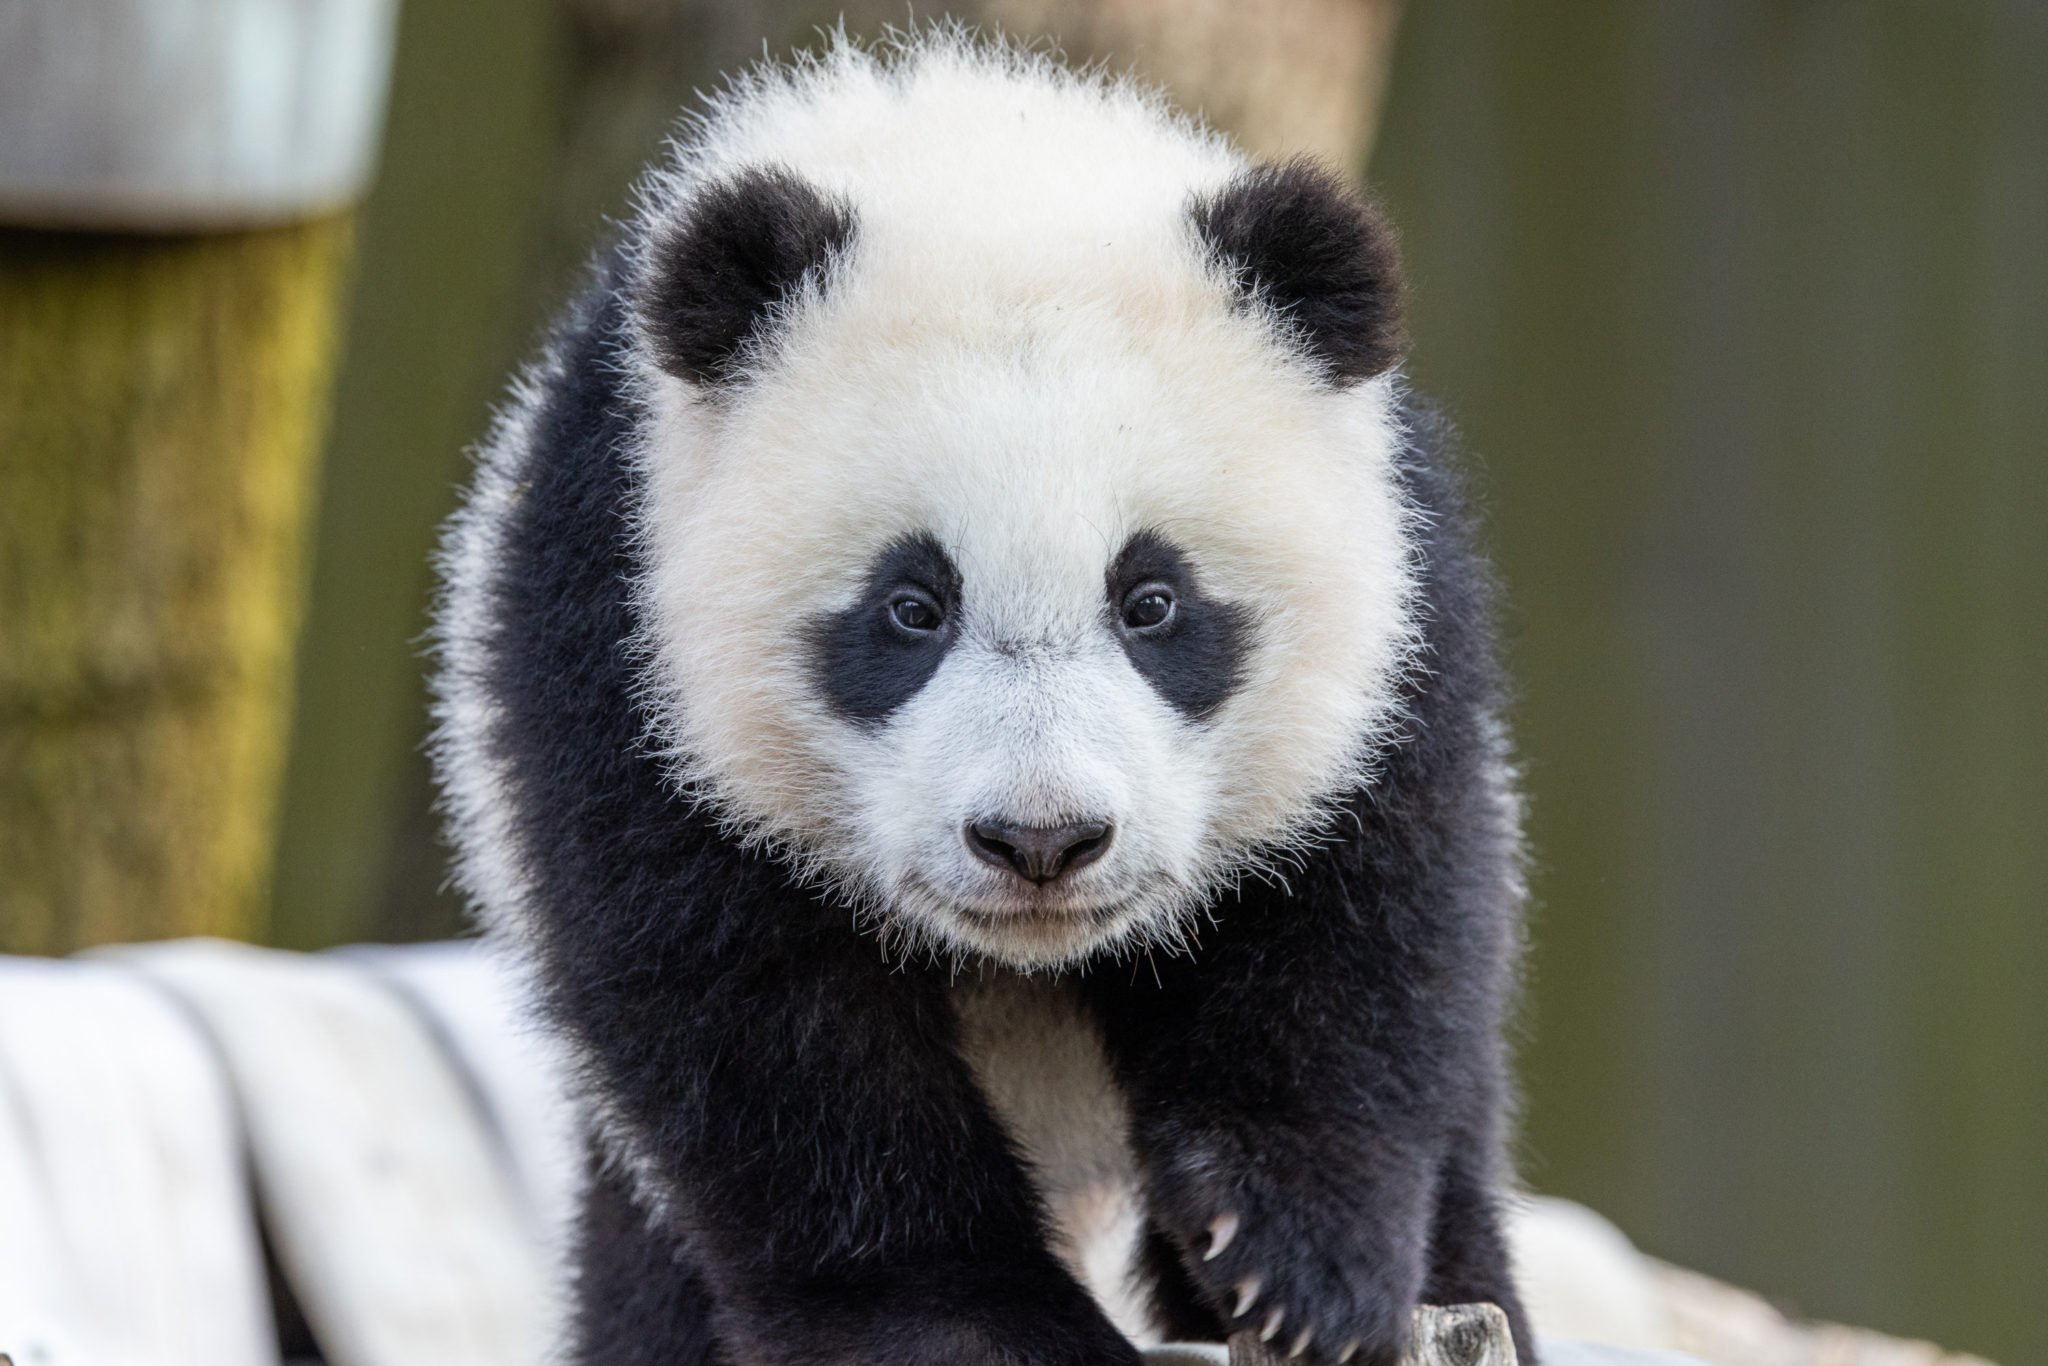 Visitors will soon be able to see baby panda Xiao Qi Ji at the zoo. Photo courtesy of Smithsonian’s National Zoo.